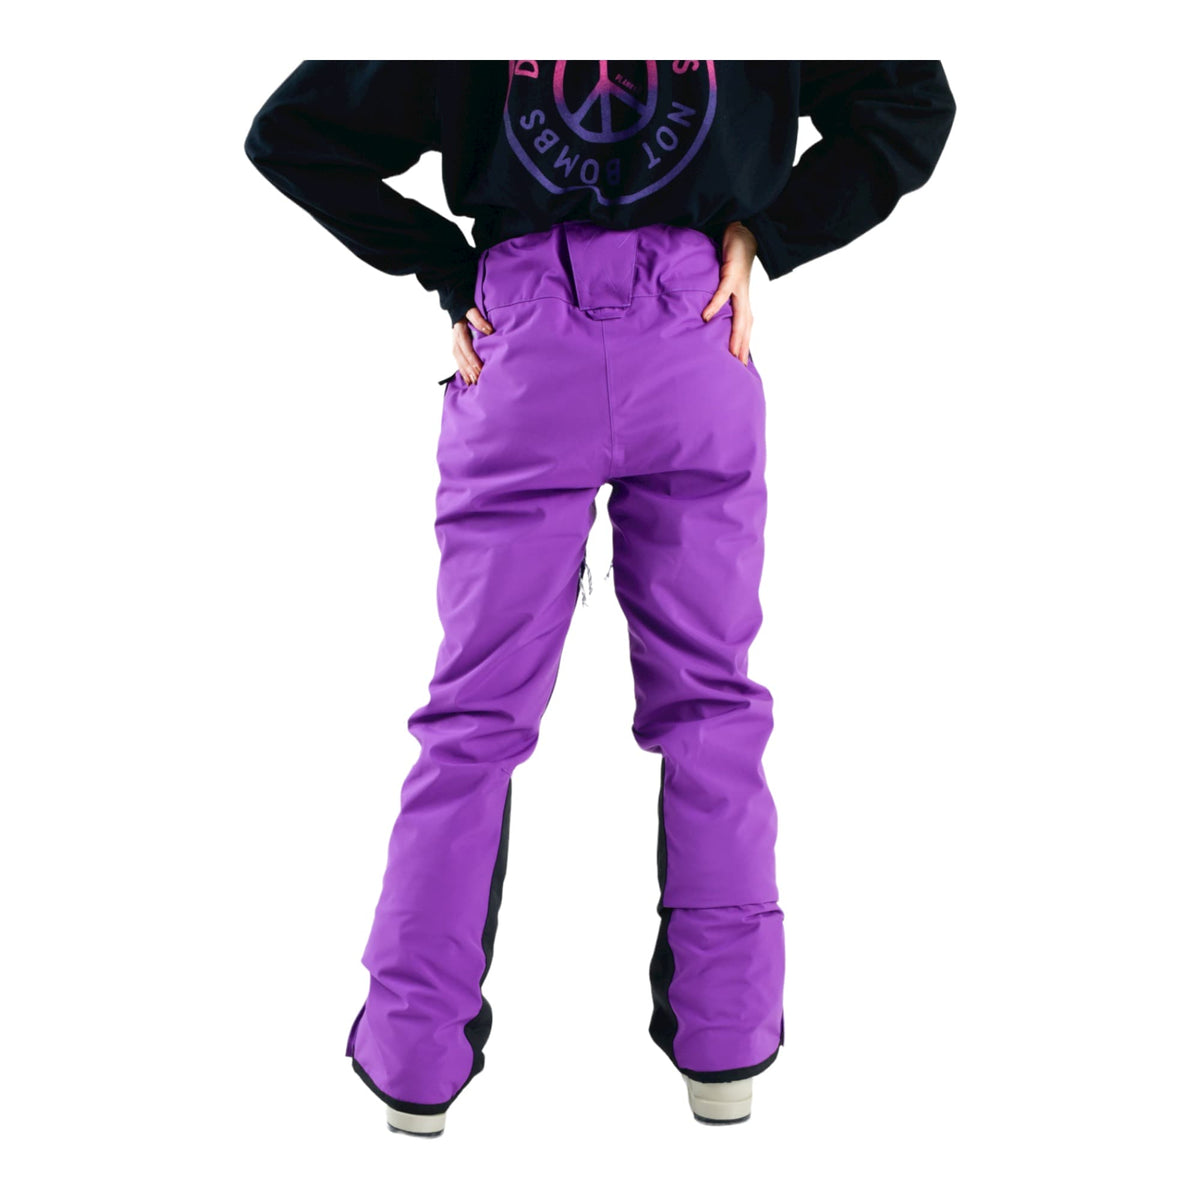 Planks All Time Insulated Women Pants – Oberson